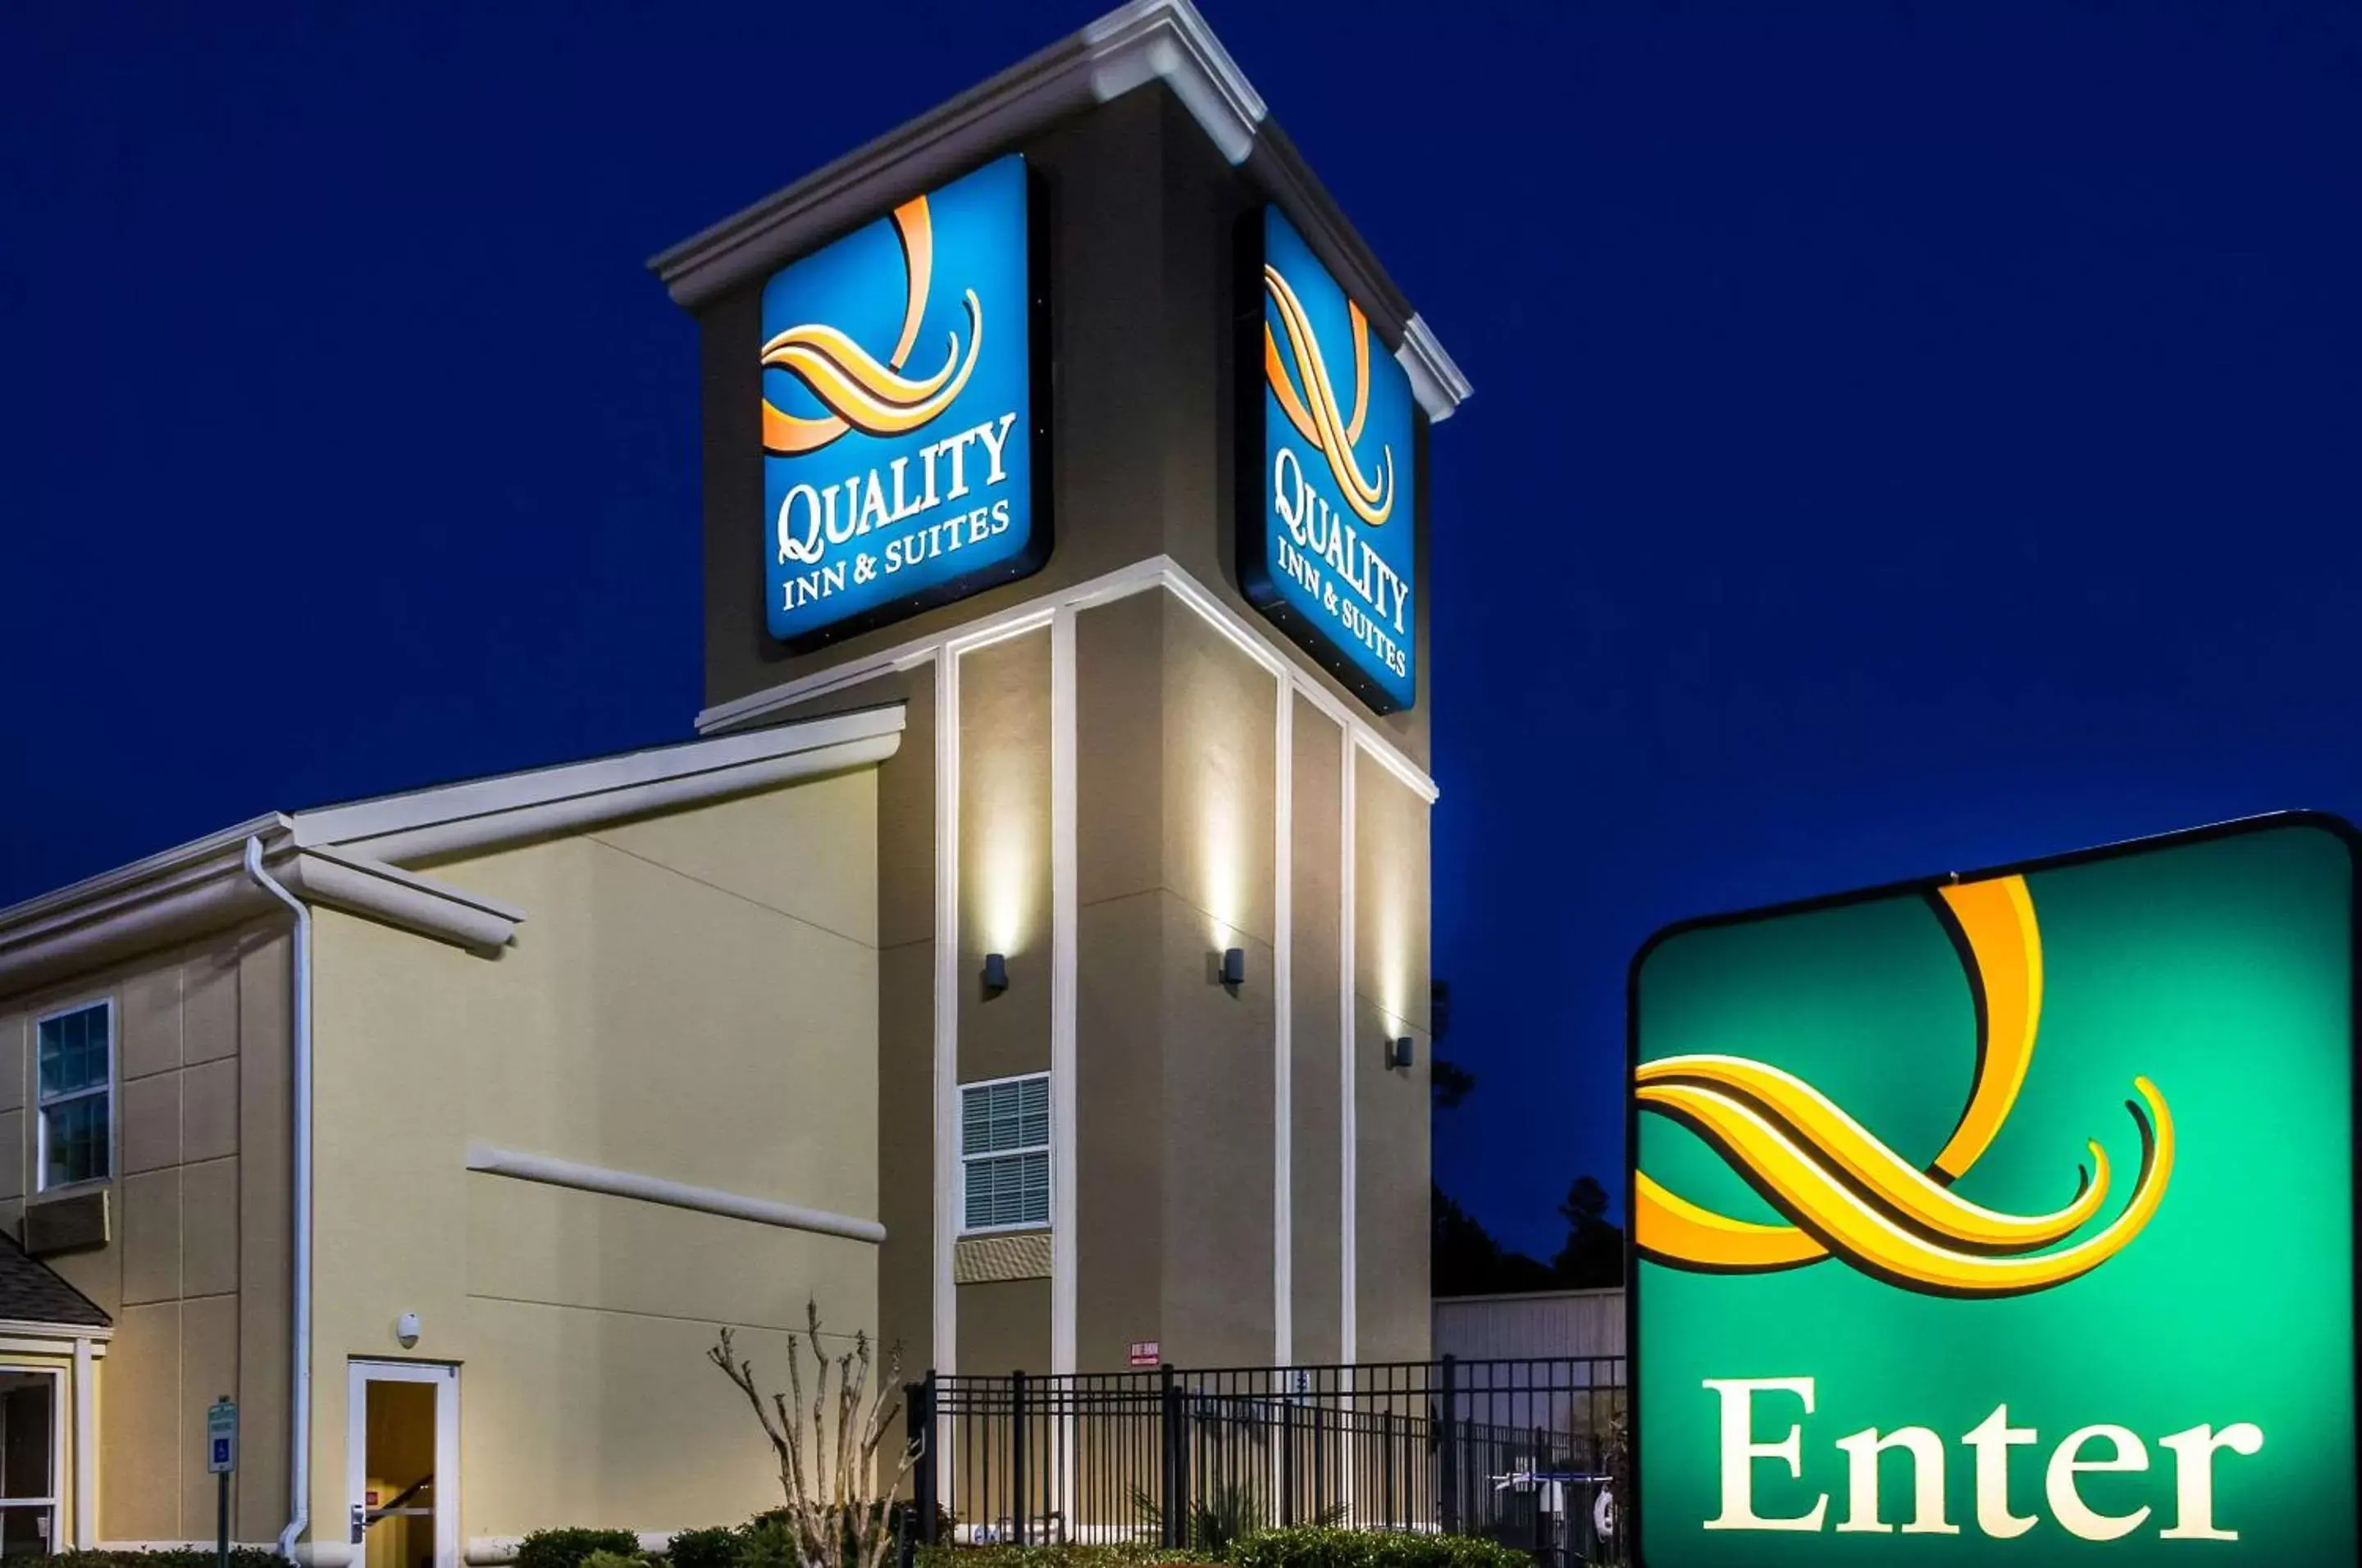 Other, Property Logo/Sign in Quality Inn & Suites Slidell